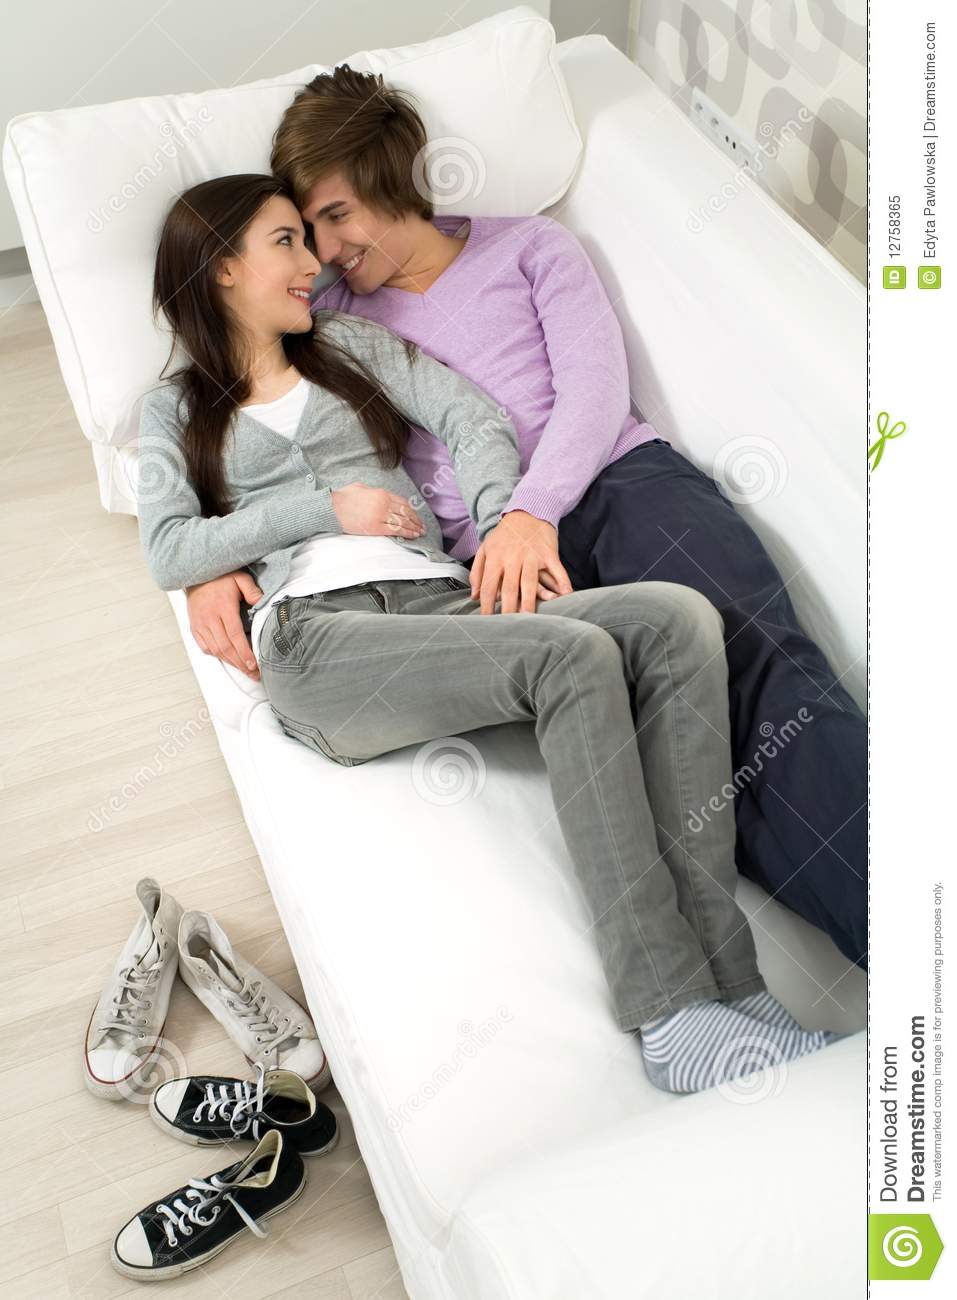 Couple Lying On Couch Royalty Free Stock Photo   Image  12758365